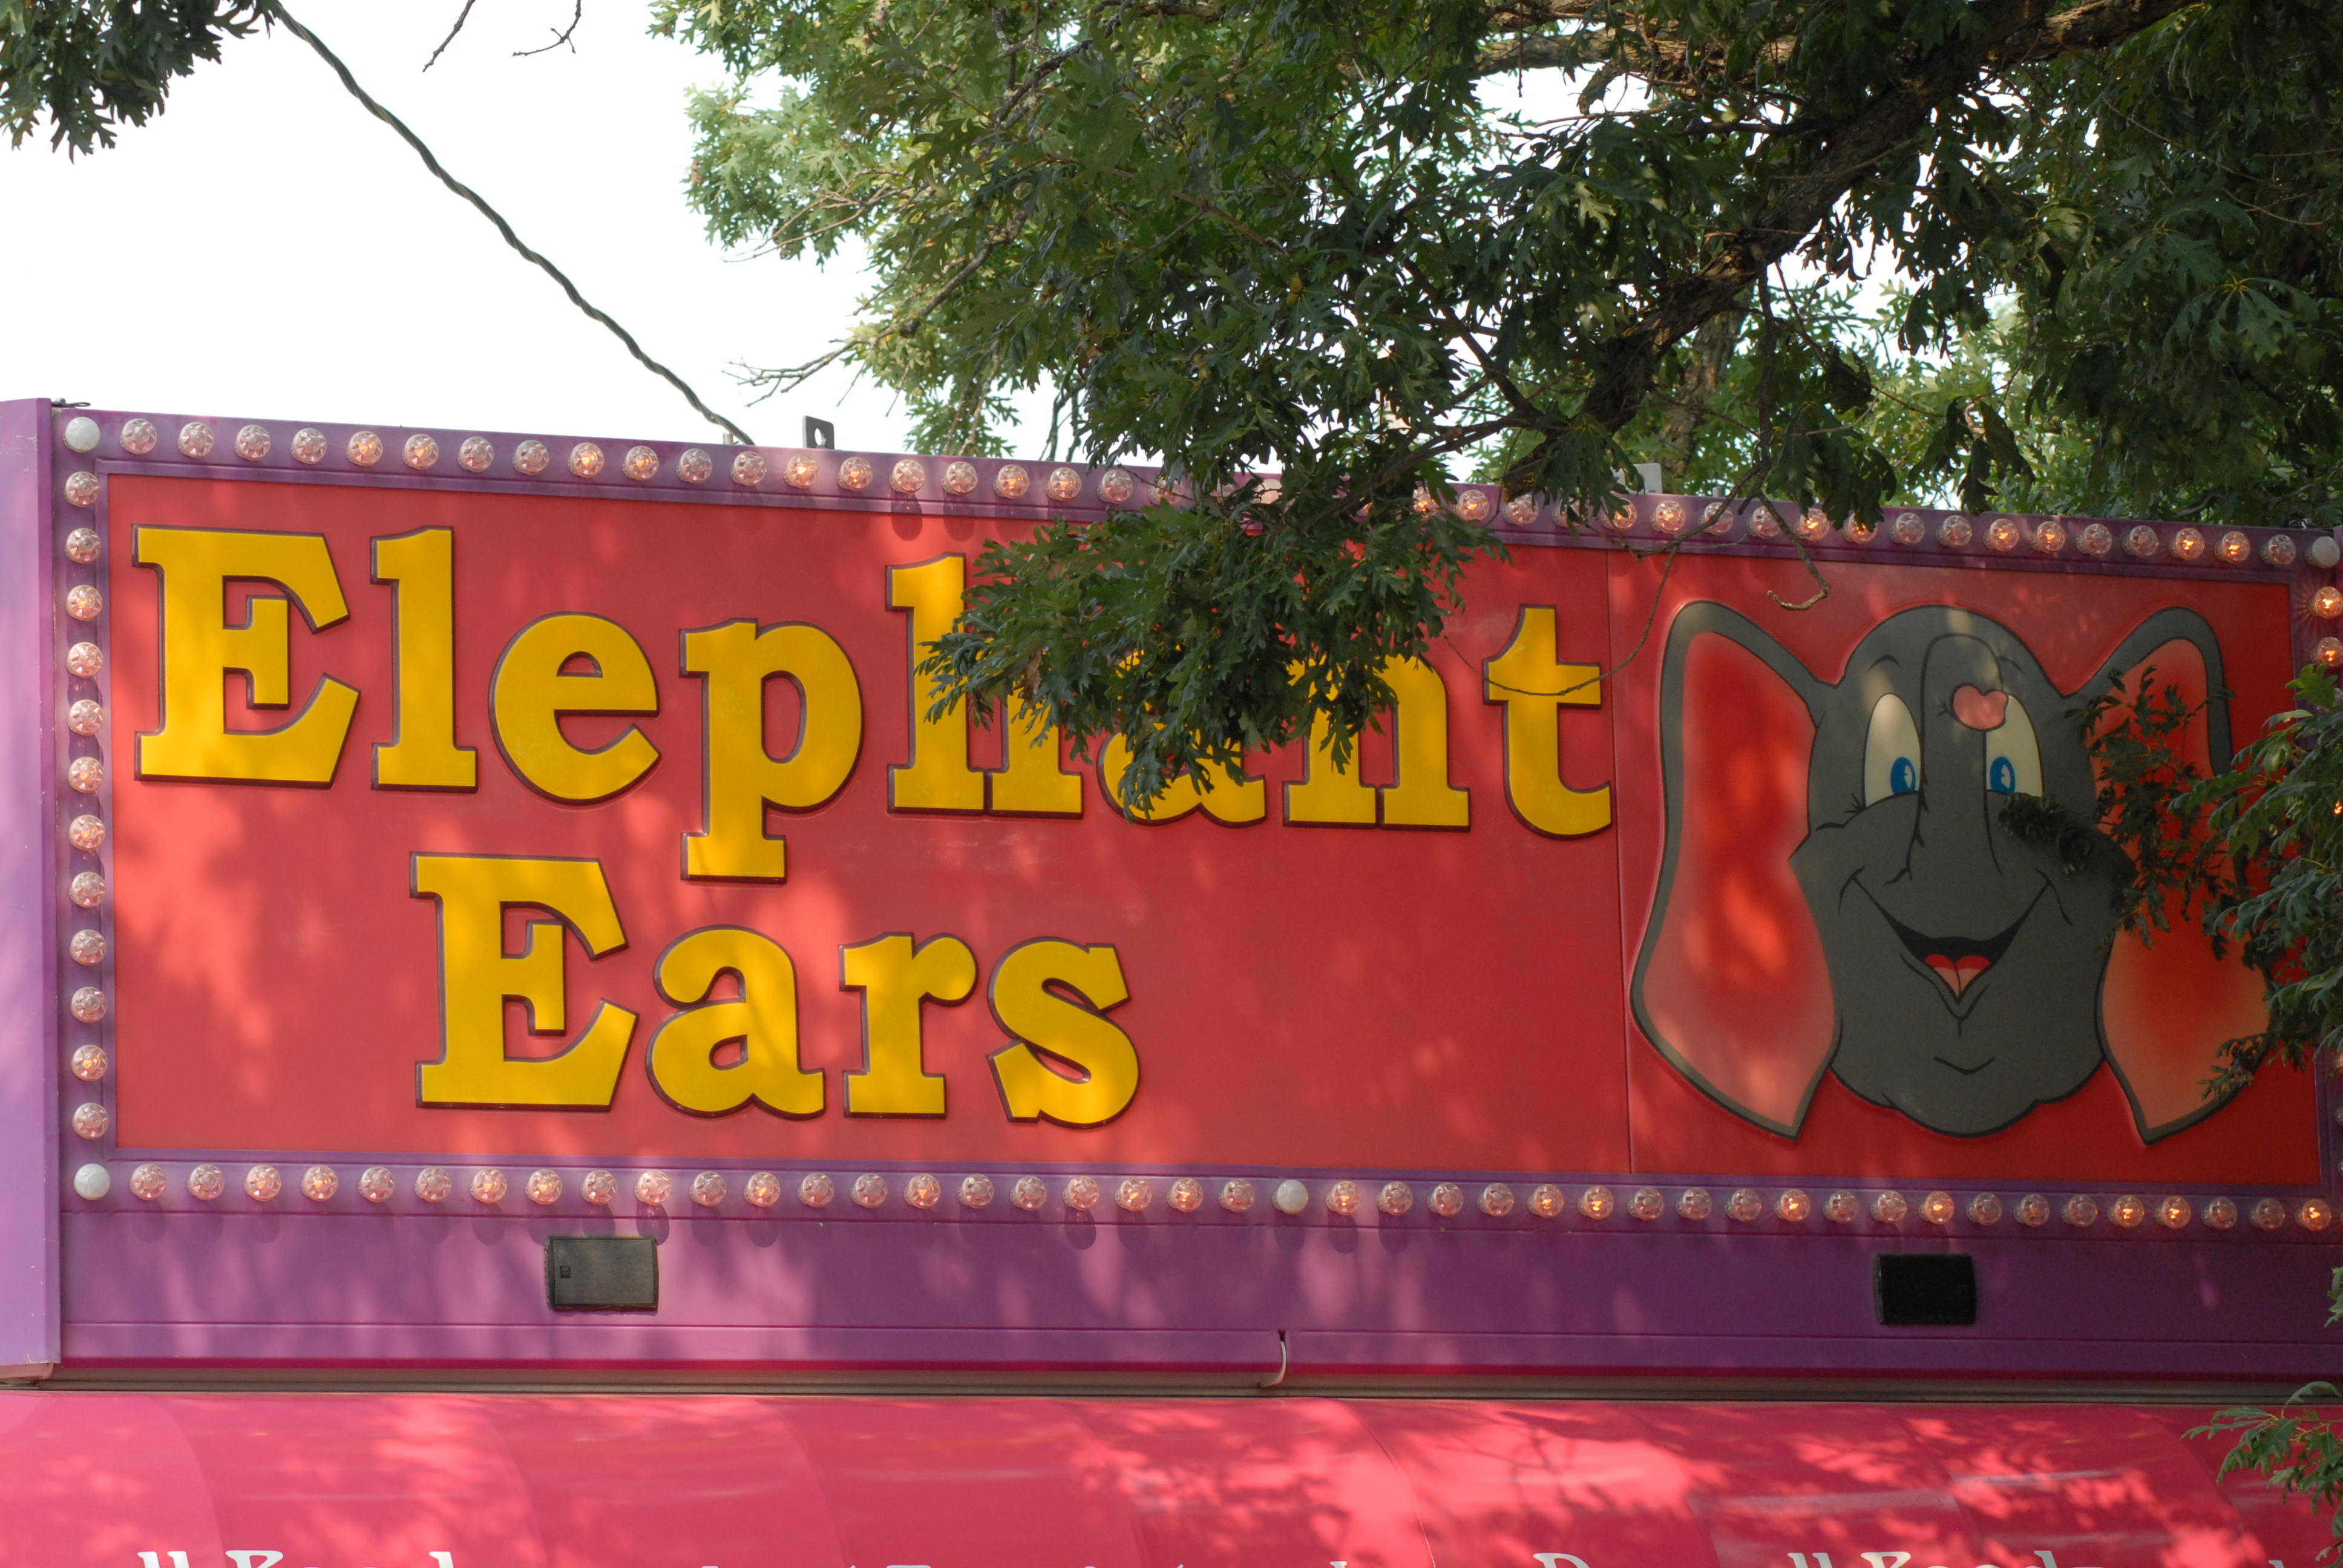 whats a fair without elephant ears